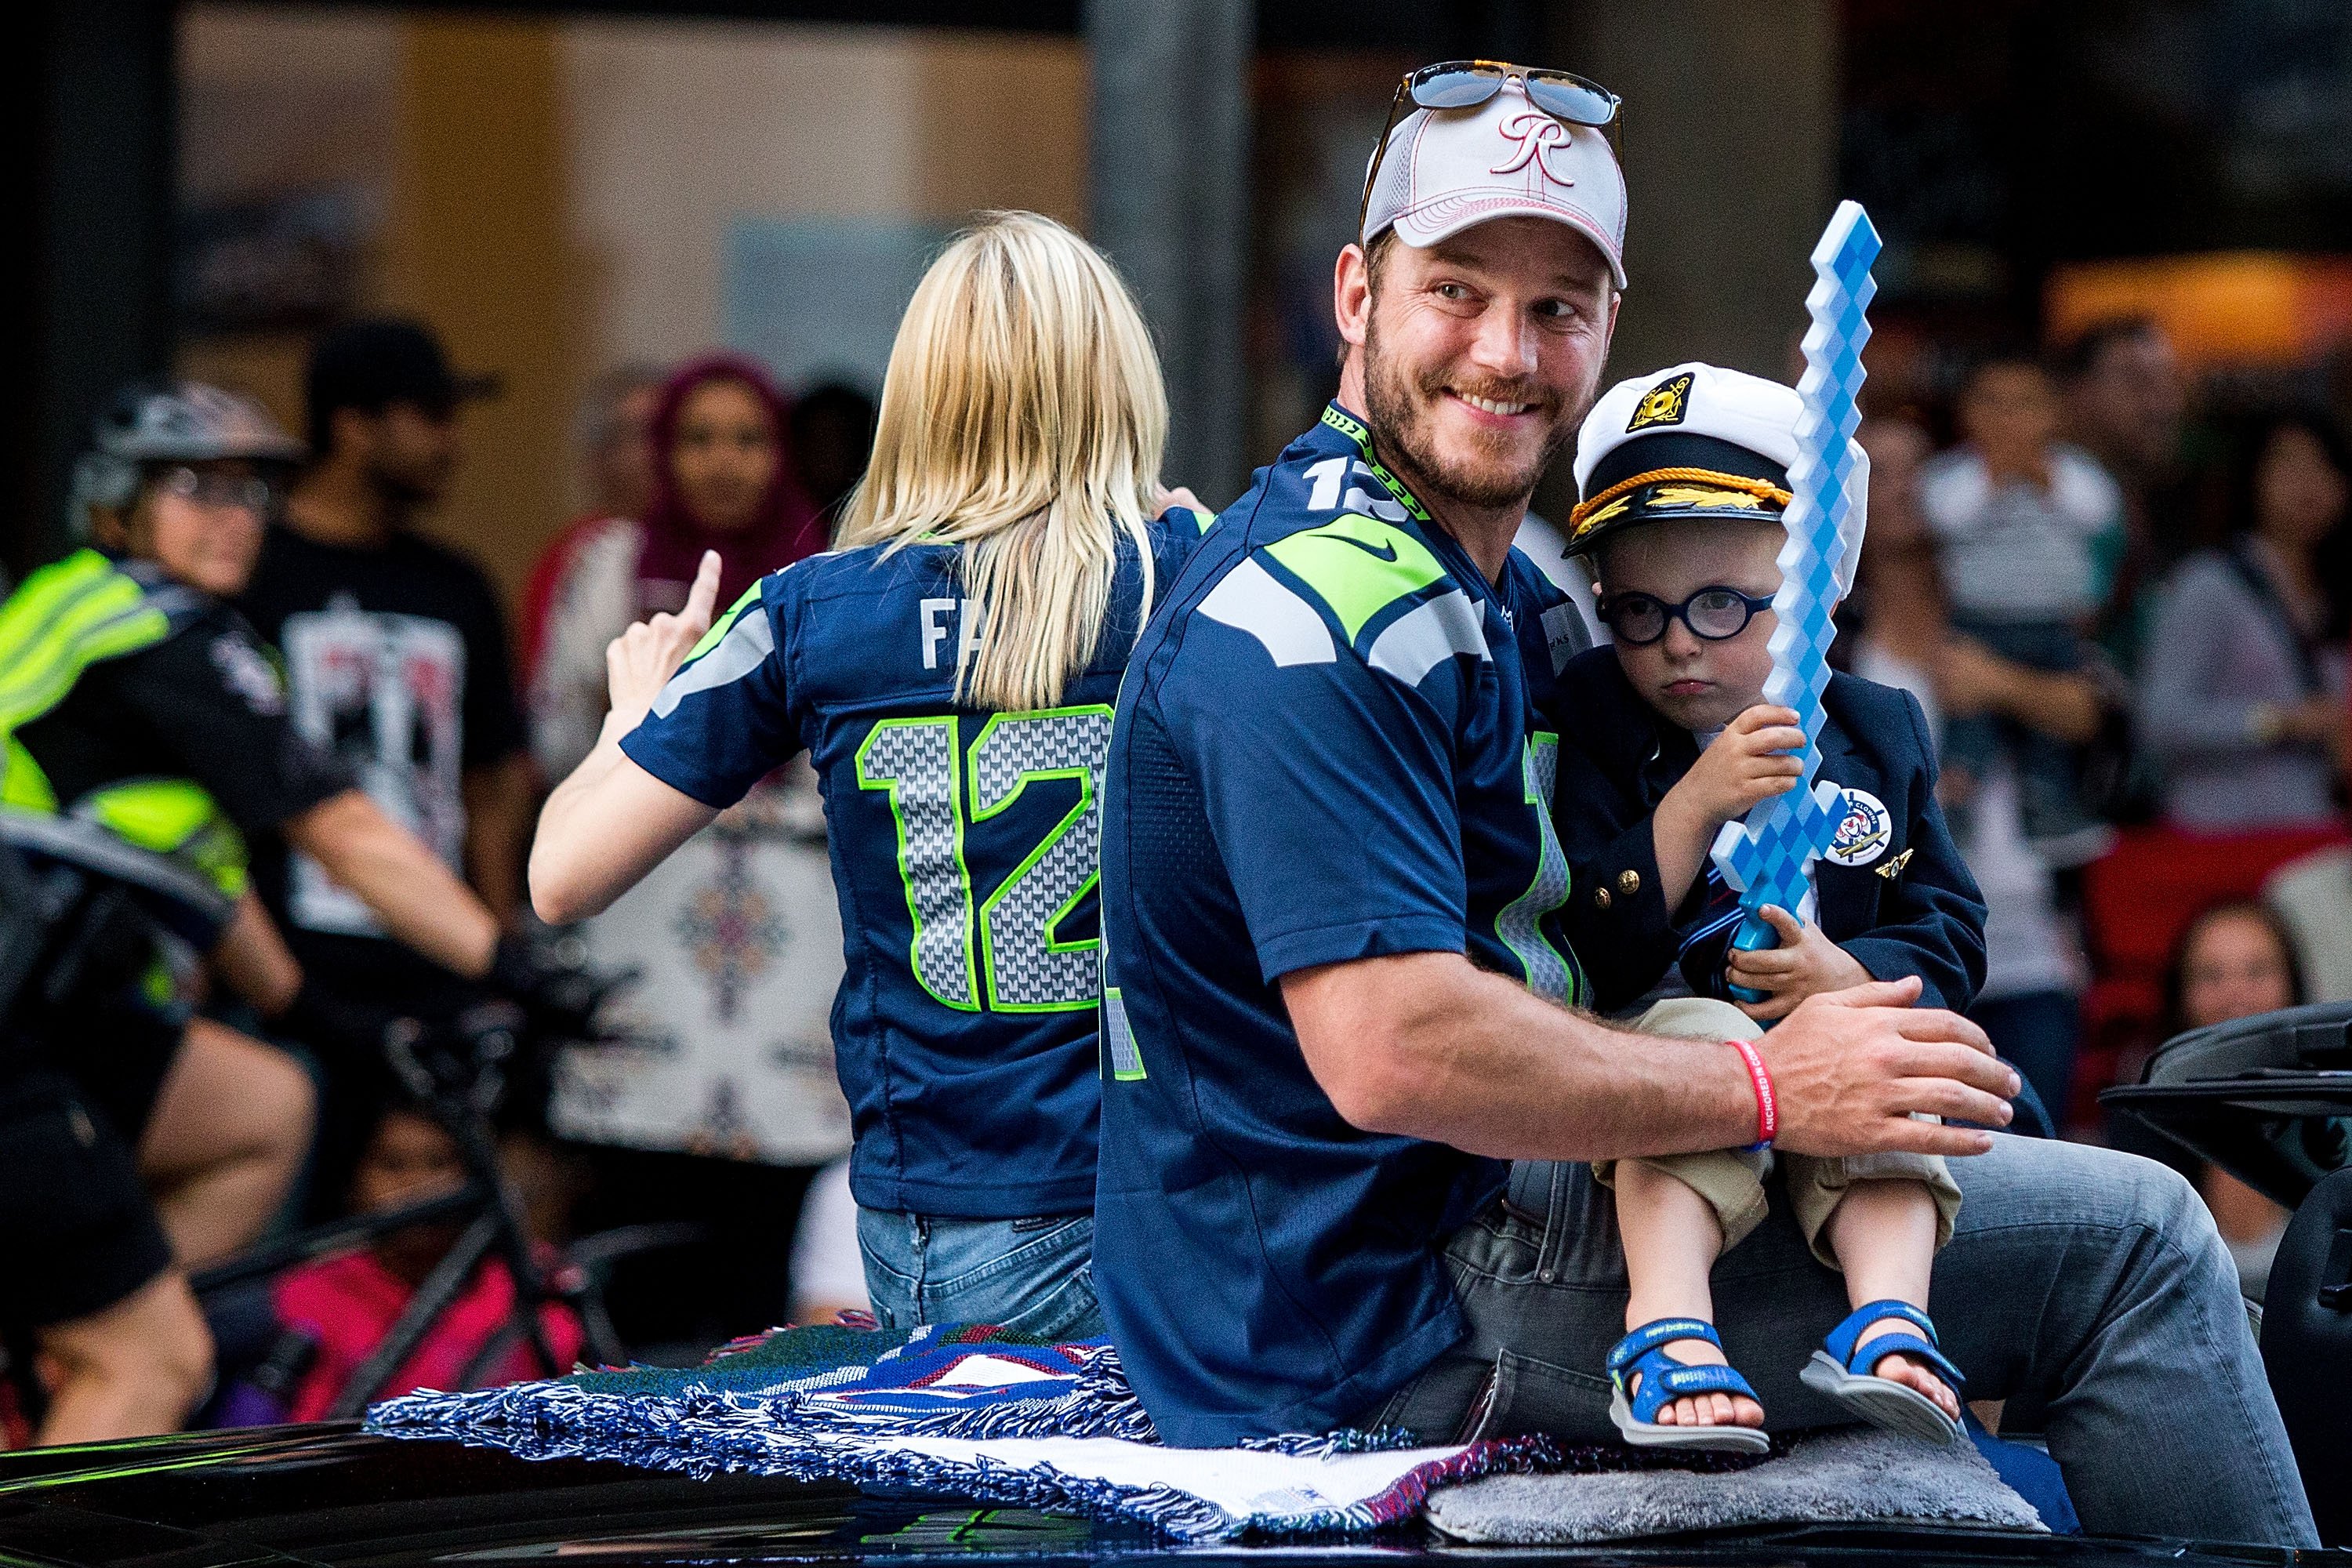 Actor Chris Pratt and son Jack Pratt ride in the Seafair Torchlight Parade Grand Marshal vehicle on July 30, 2016, in Seattle, Washington. | Source: Getty Images